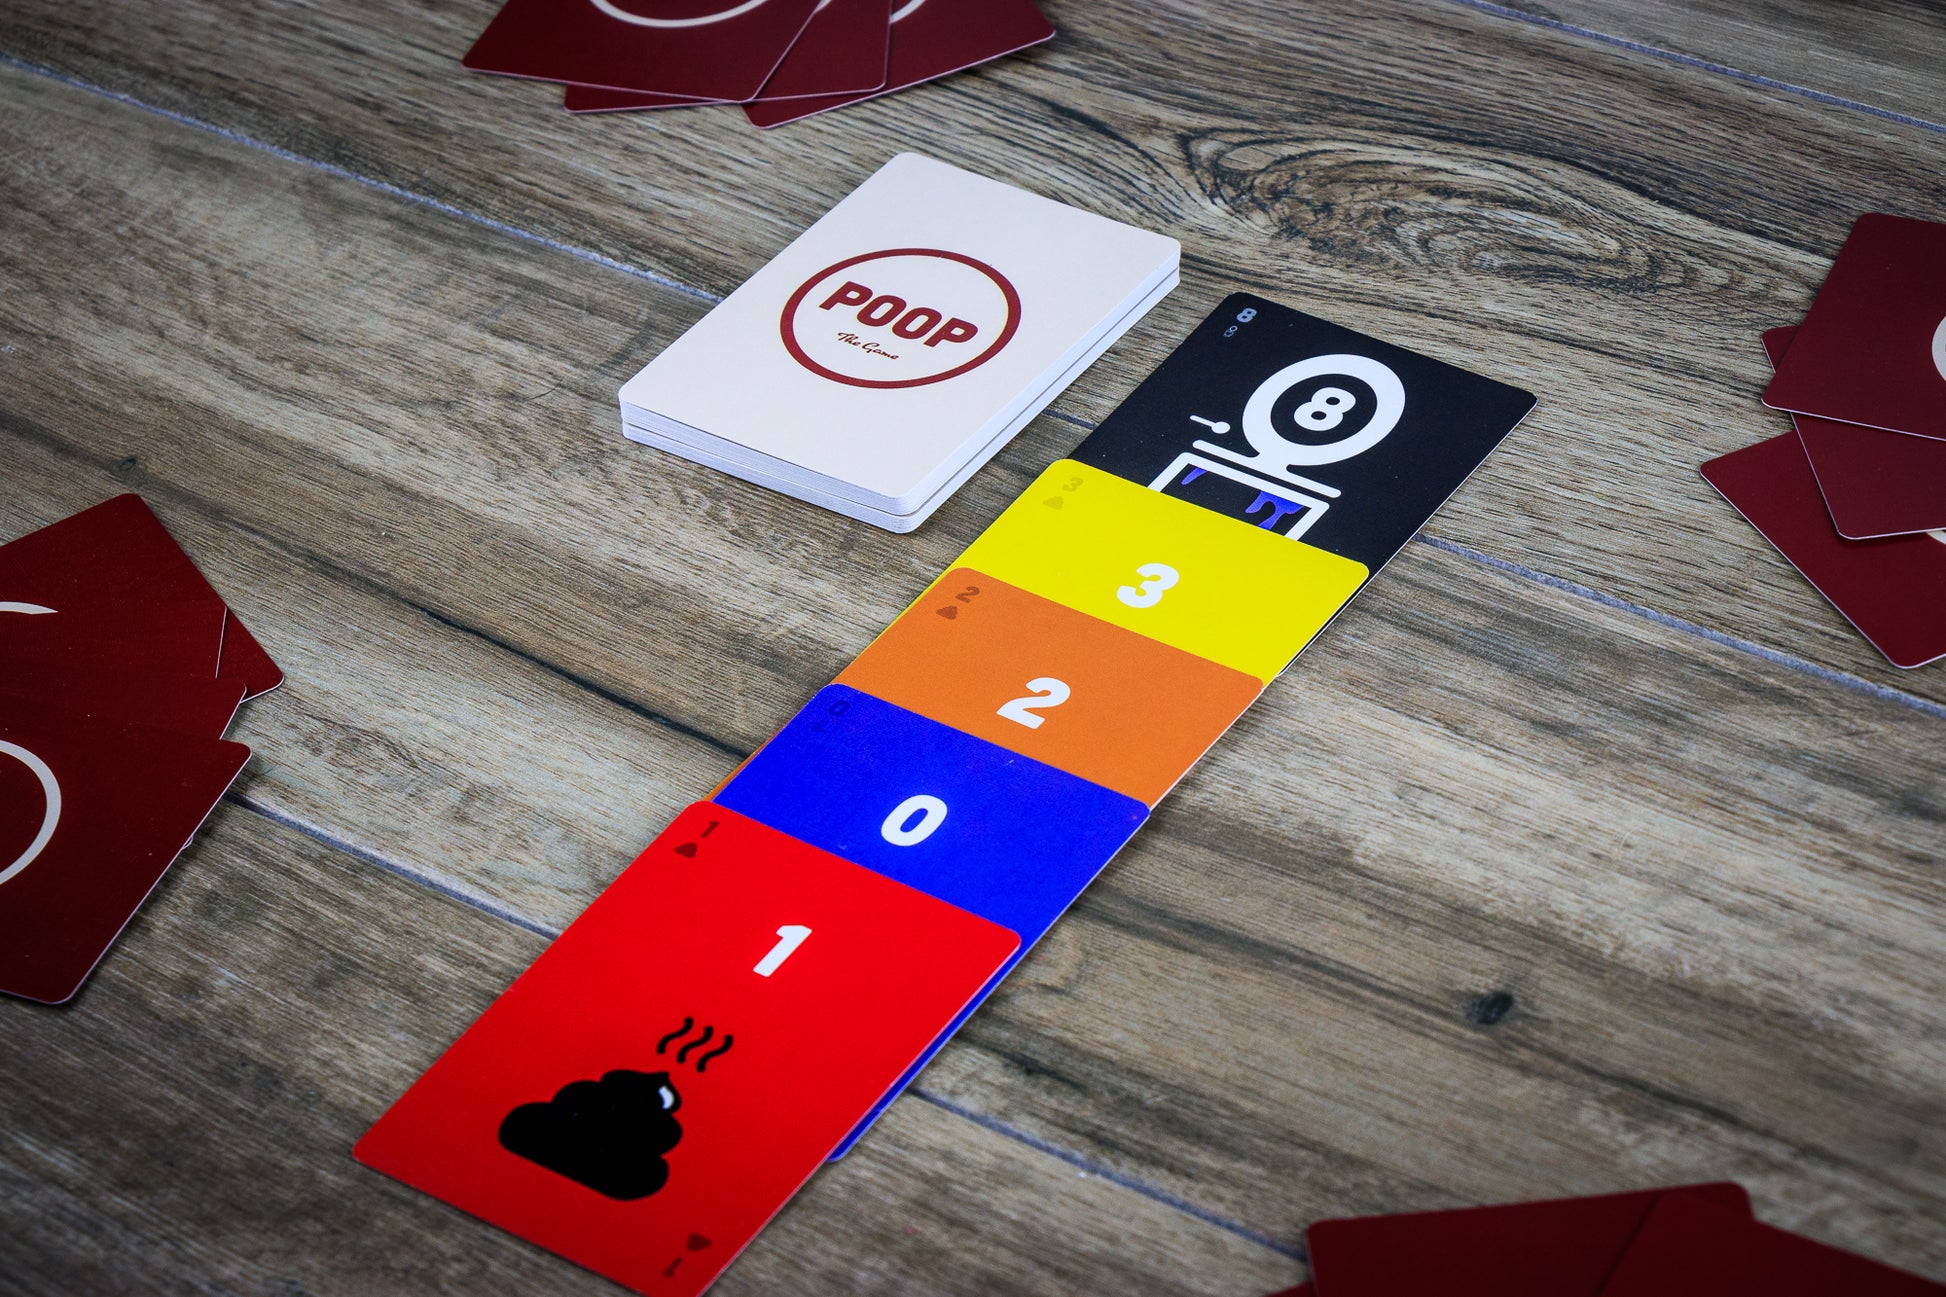 POOP: The Game | Family Friendly Card Game | 2-5 Players Game Breaking Games